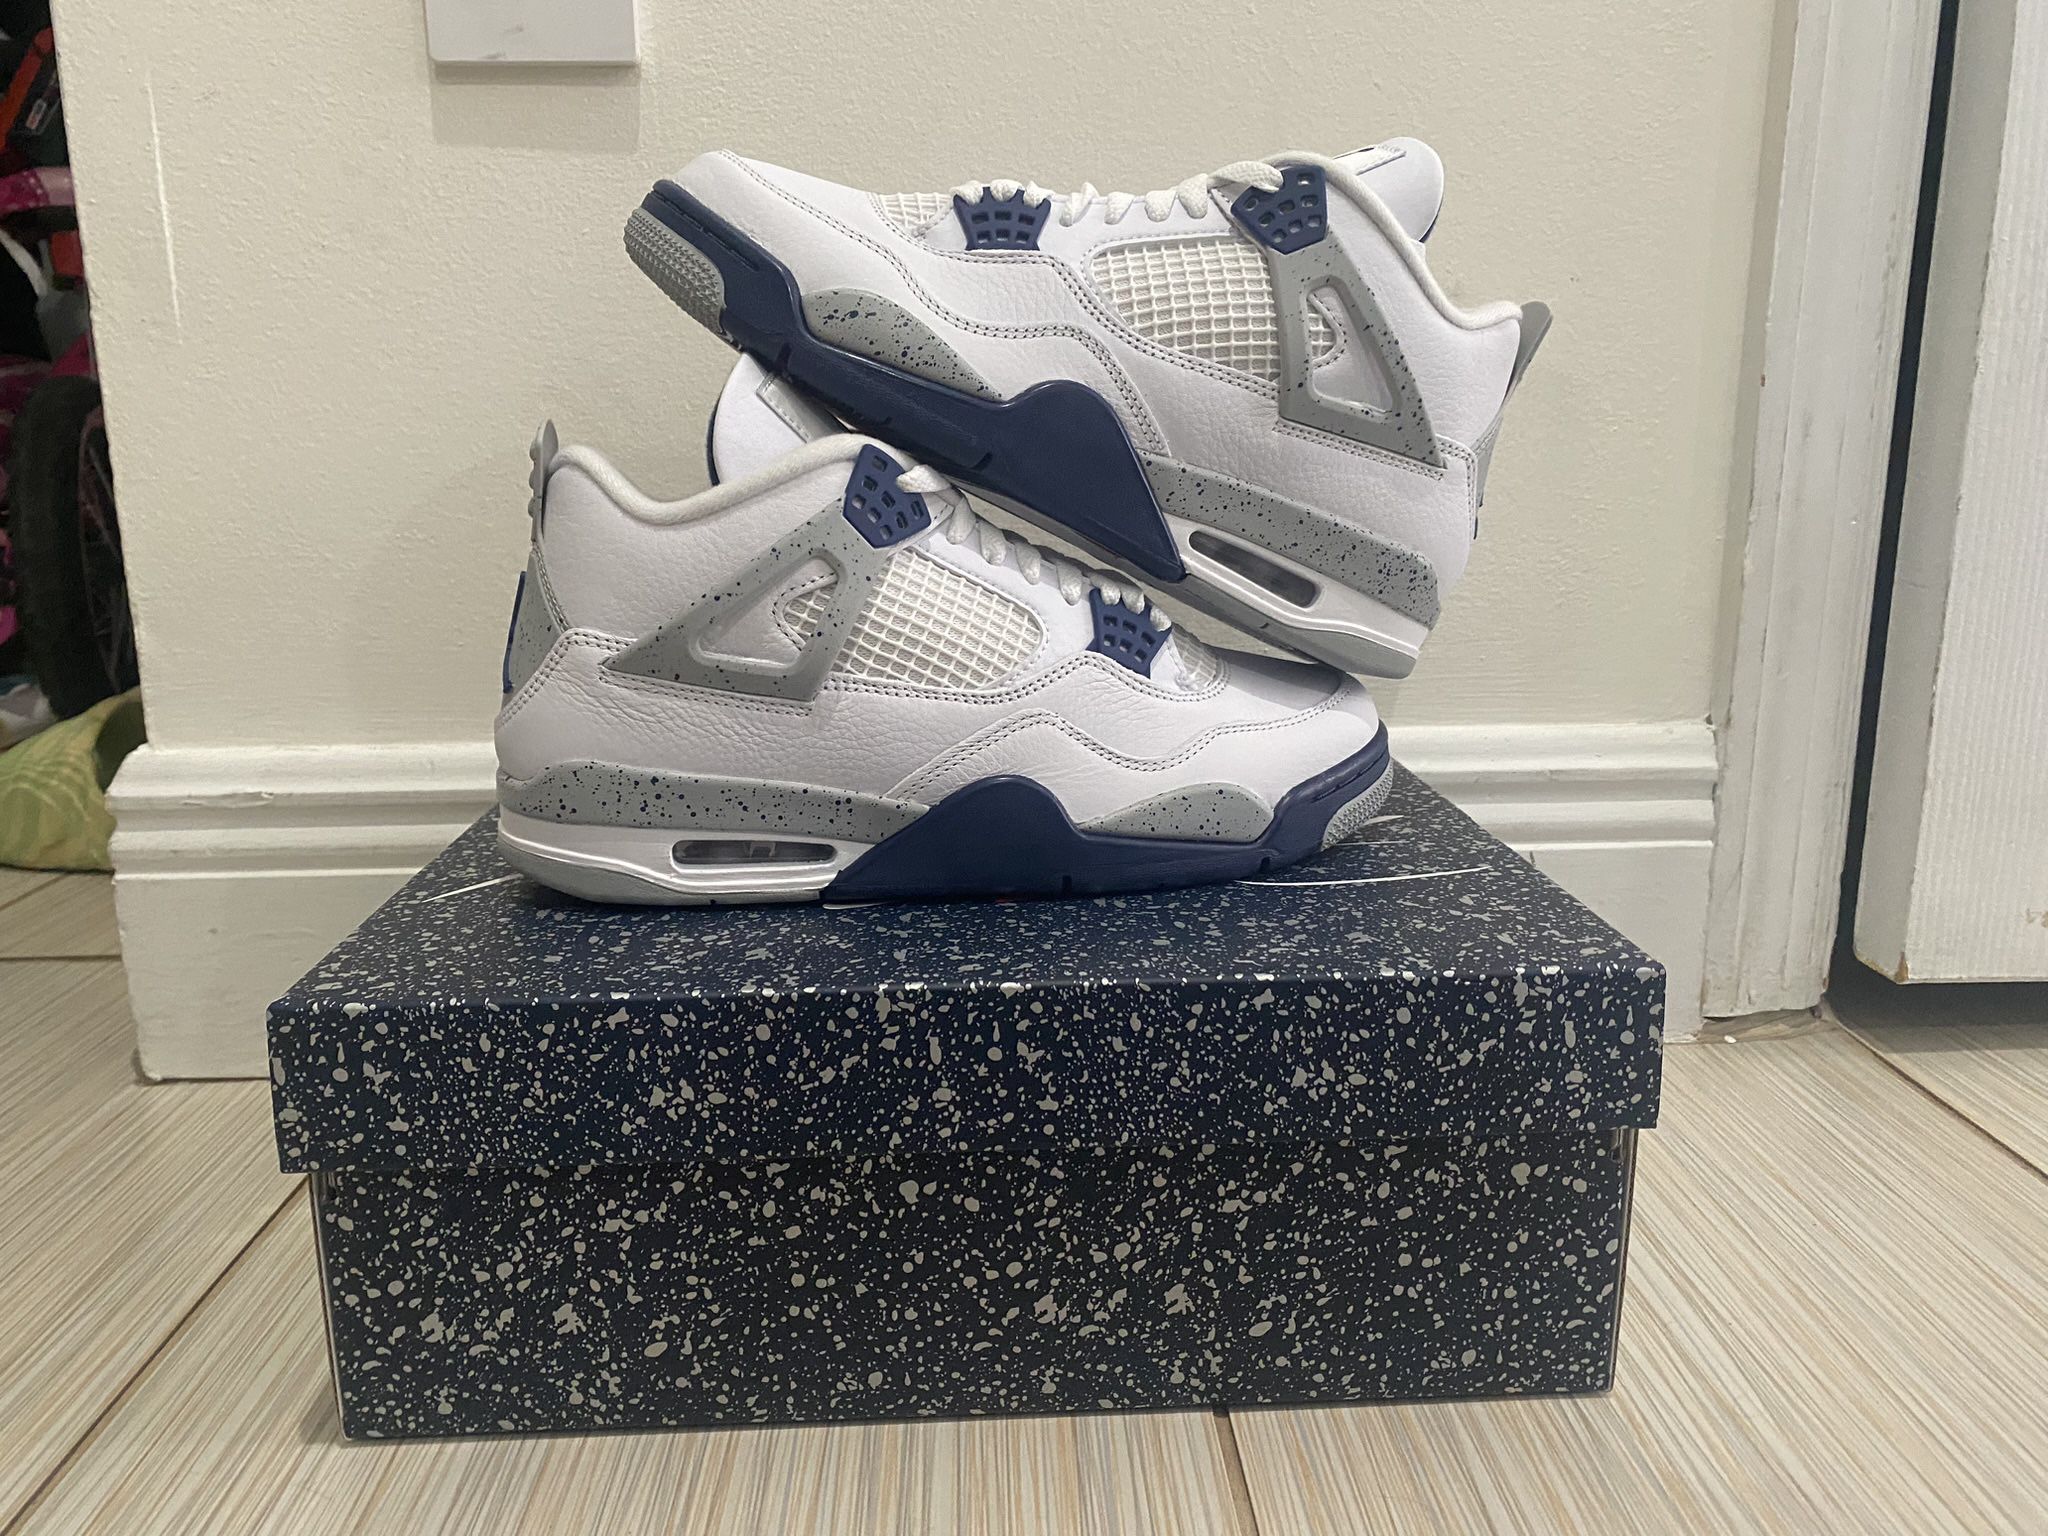 LOUIS VUITTON LV AIR JORDAN 4 RETRO NAVY BLUE WHITE BLACK NEW SNEAKERS SHOES  SIZE 8.5 42 A4 for Sale in Miami, FL - OfferUp